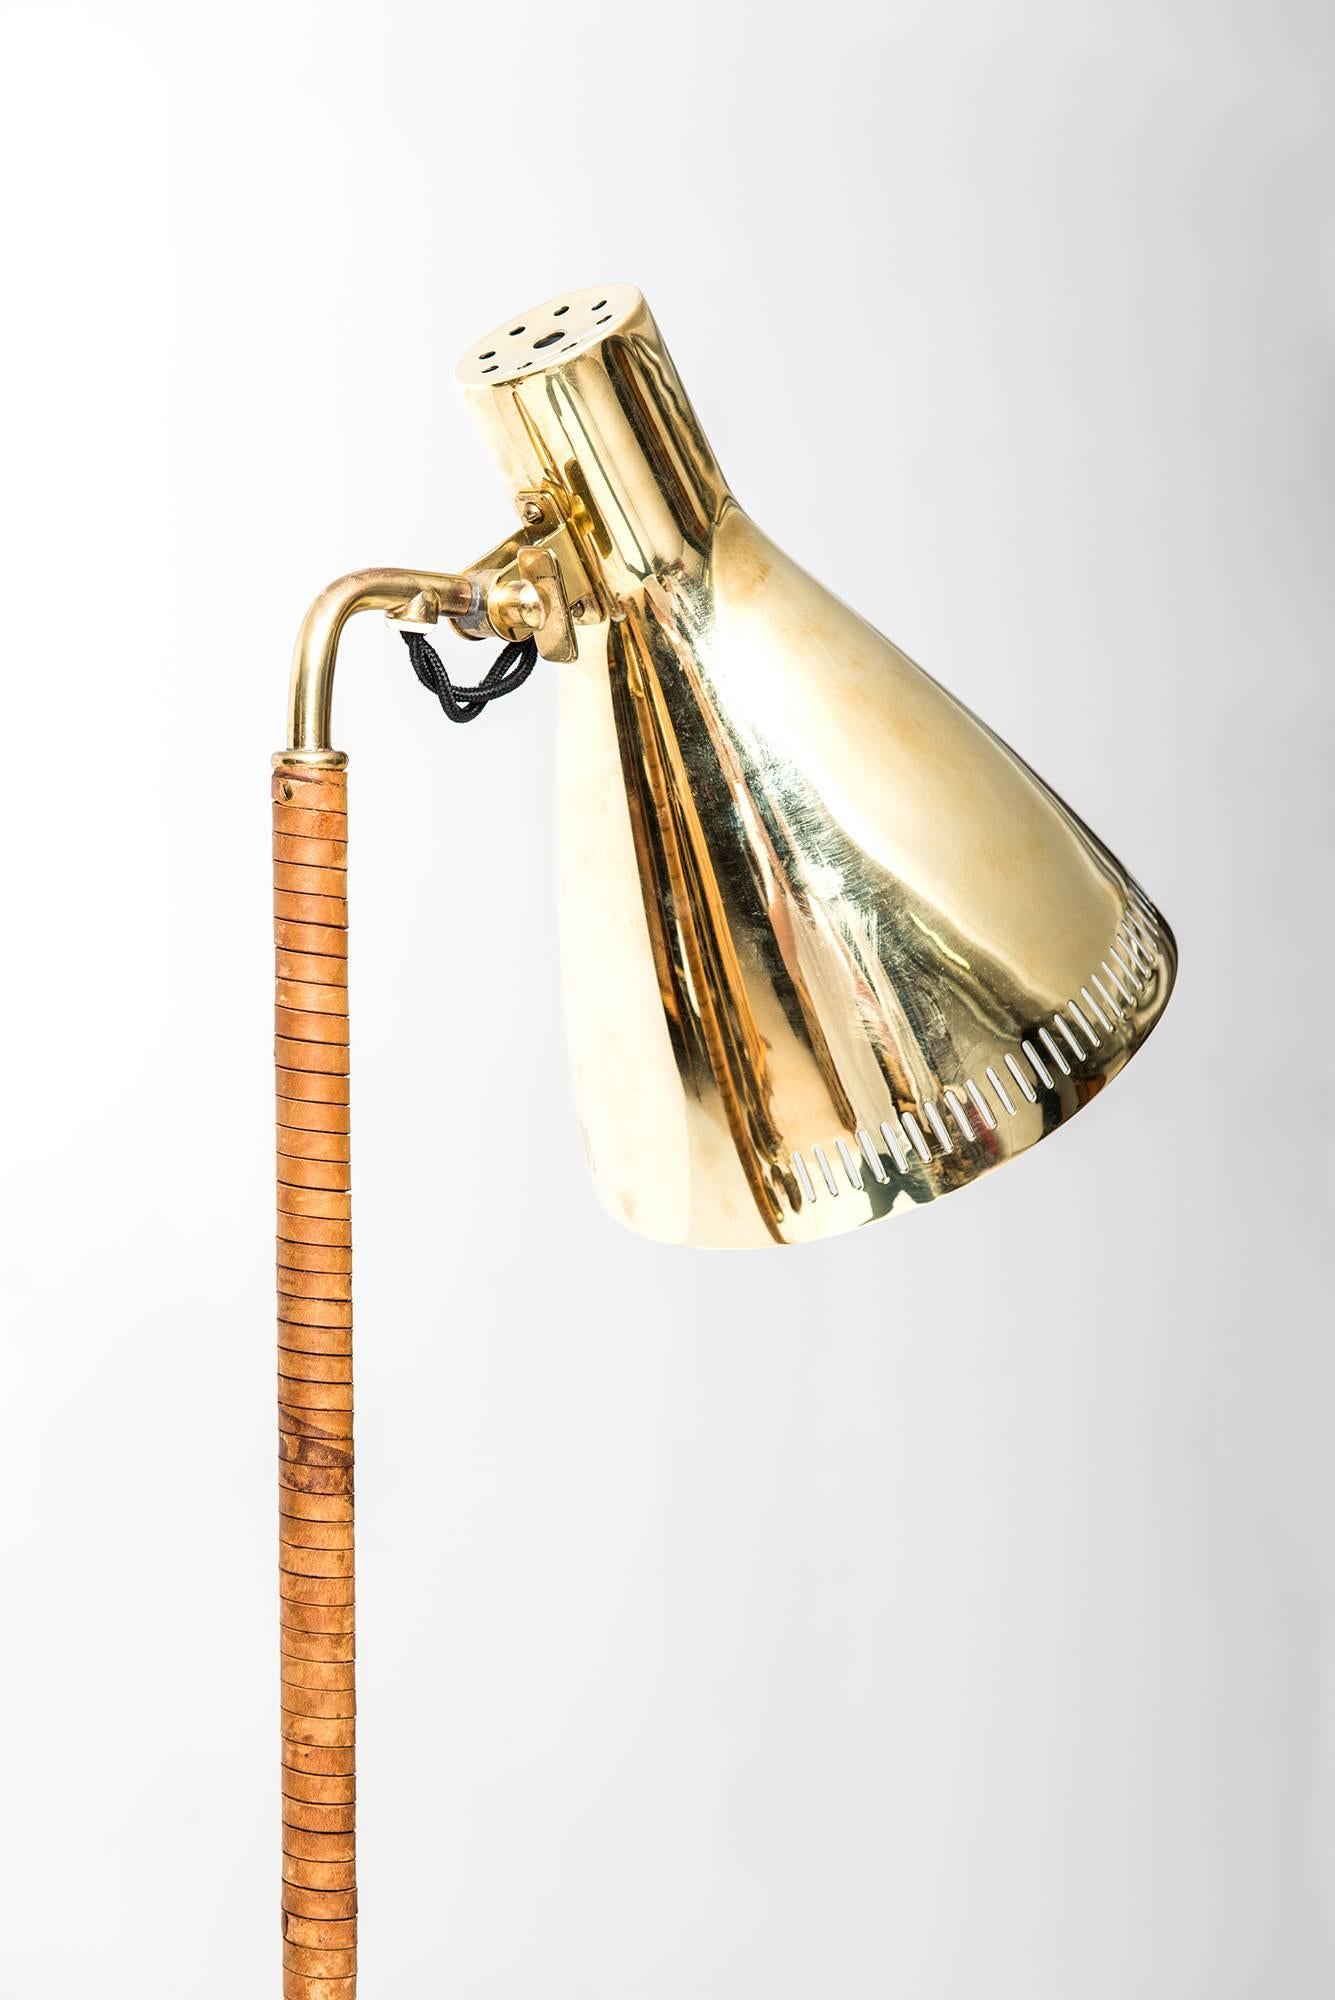 Brass Paavo Tynell Table Lamp Model 9224 by Taito Oy in Finland